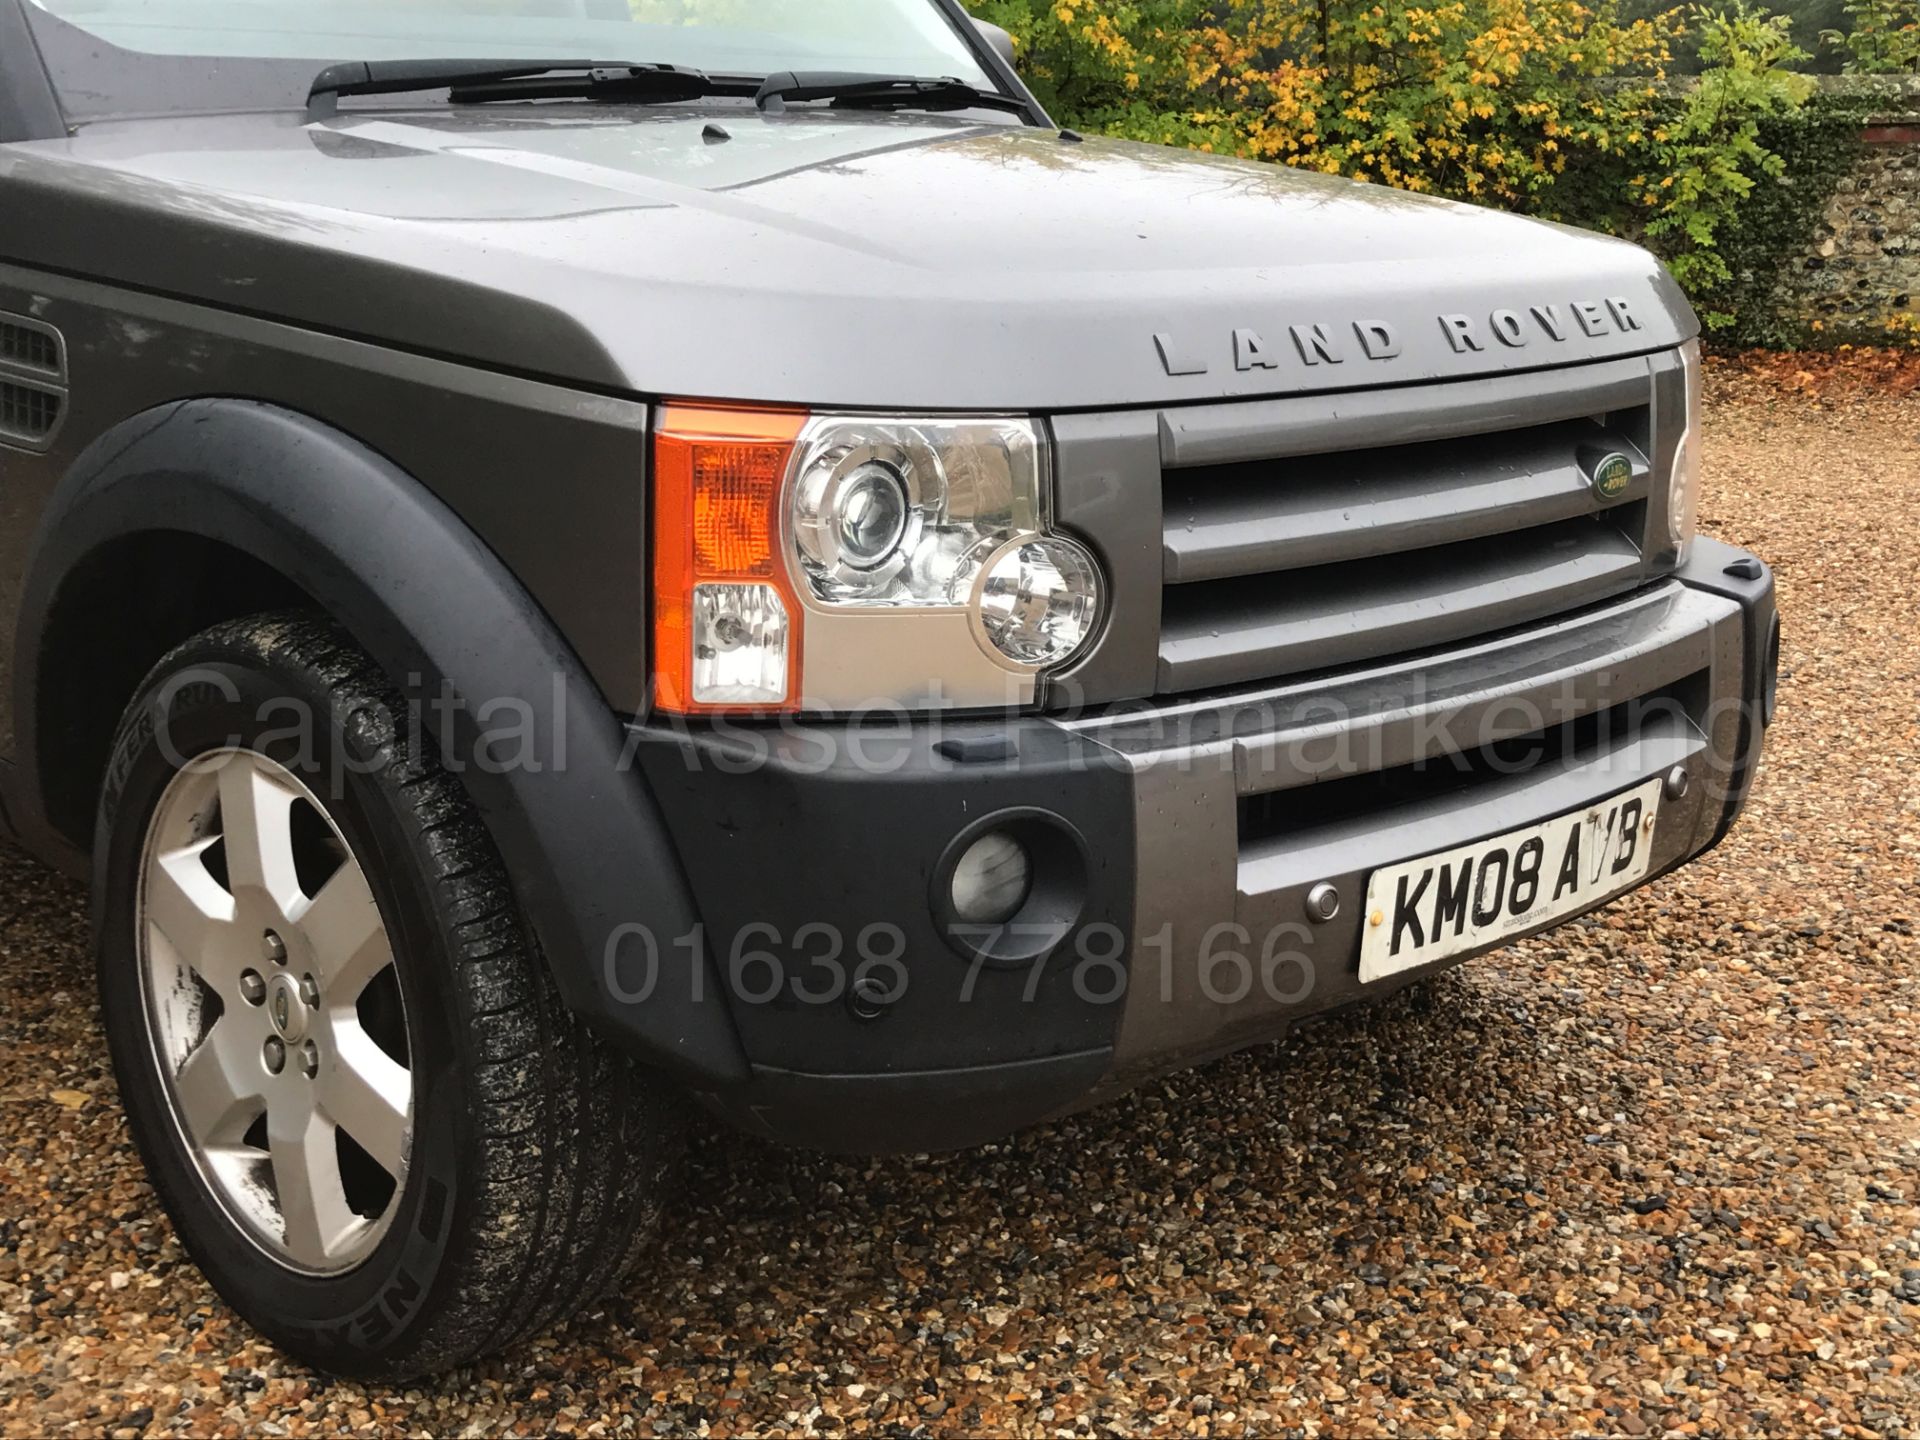 LAND ROVER DISCOVERY 3 HSE (2008 - 08 REG) 'TDV6 - AUTO - LEATHER - SAT NAV - 7 SEATER' *1 OWNER* - Image 11 of 37